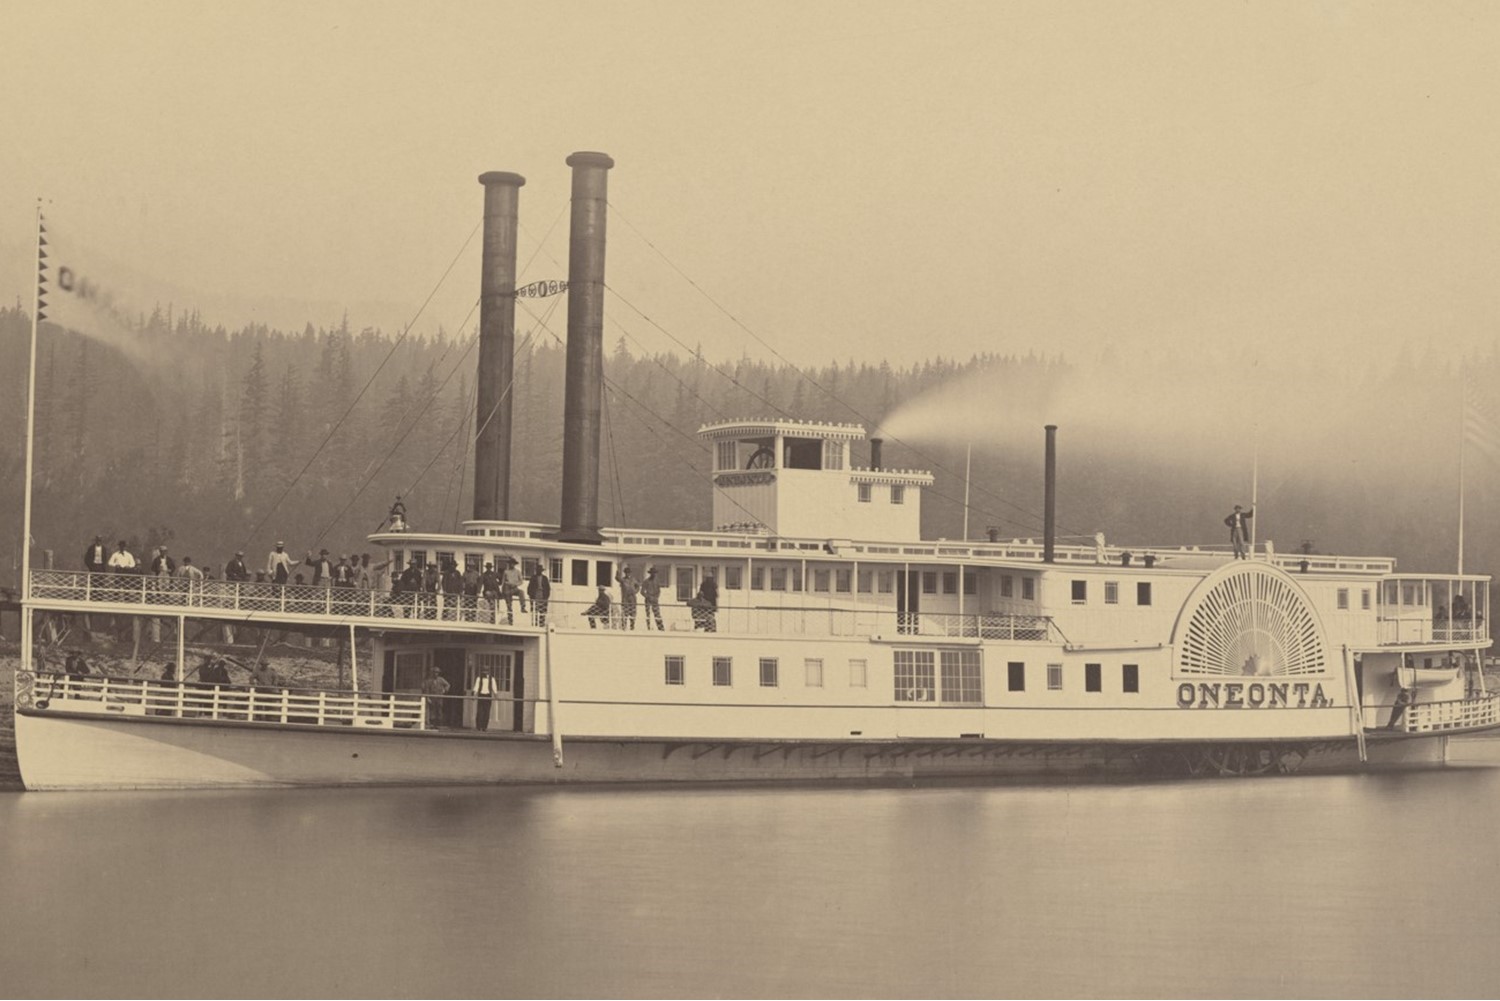 Photo from 1867 of the Oneonta sidewheeler on Columbia River.